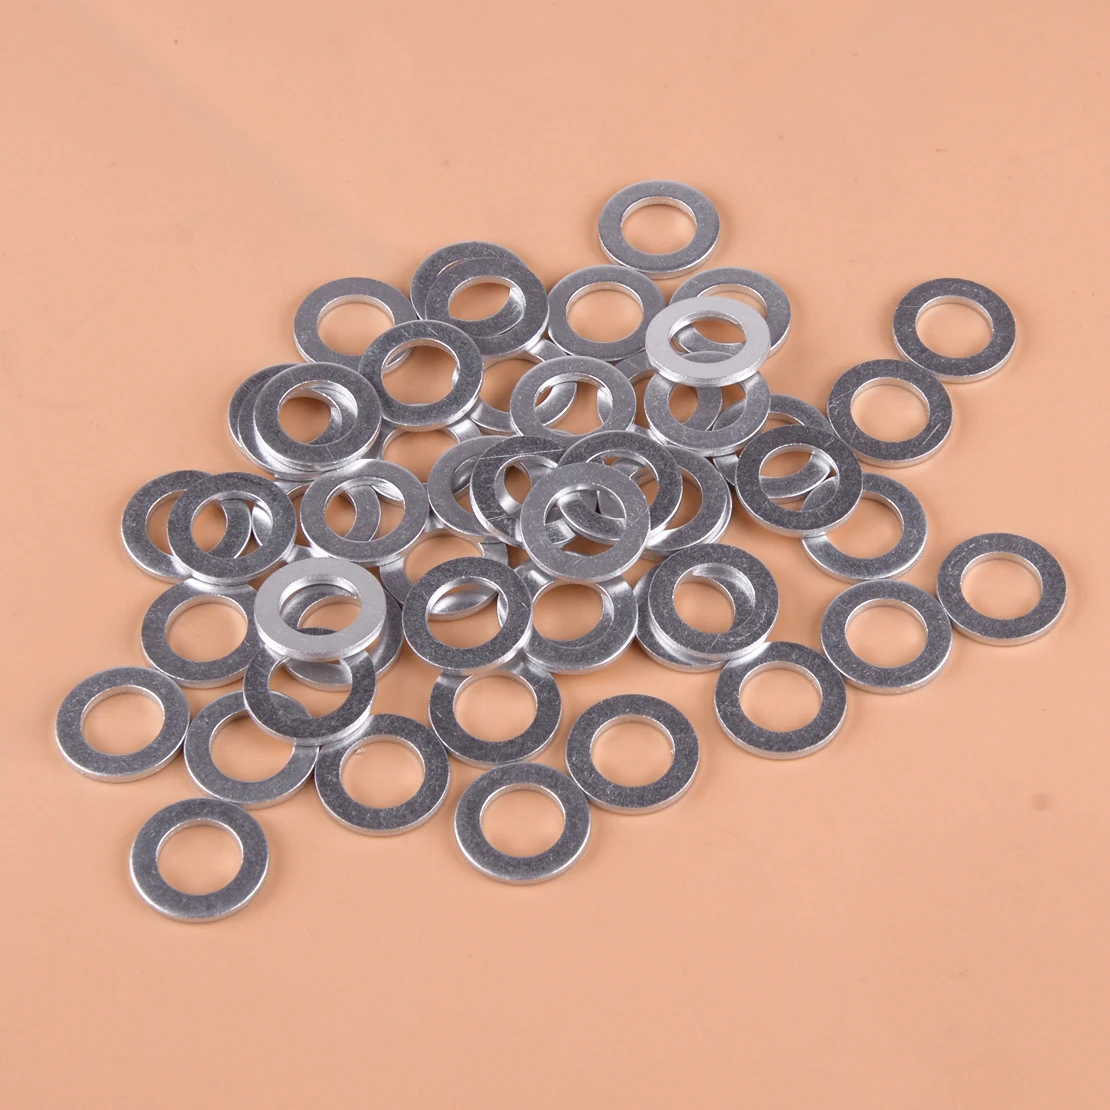 5x Universal Auto O Rings Seal Crush Washers Inside 8mm Outside 12mm Diameter 